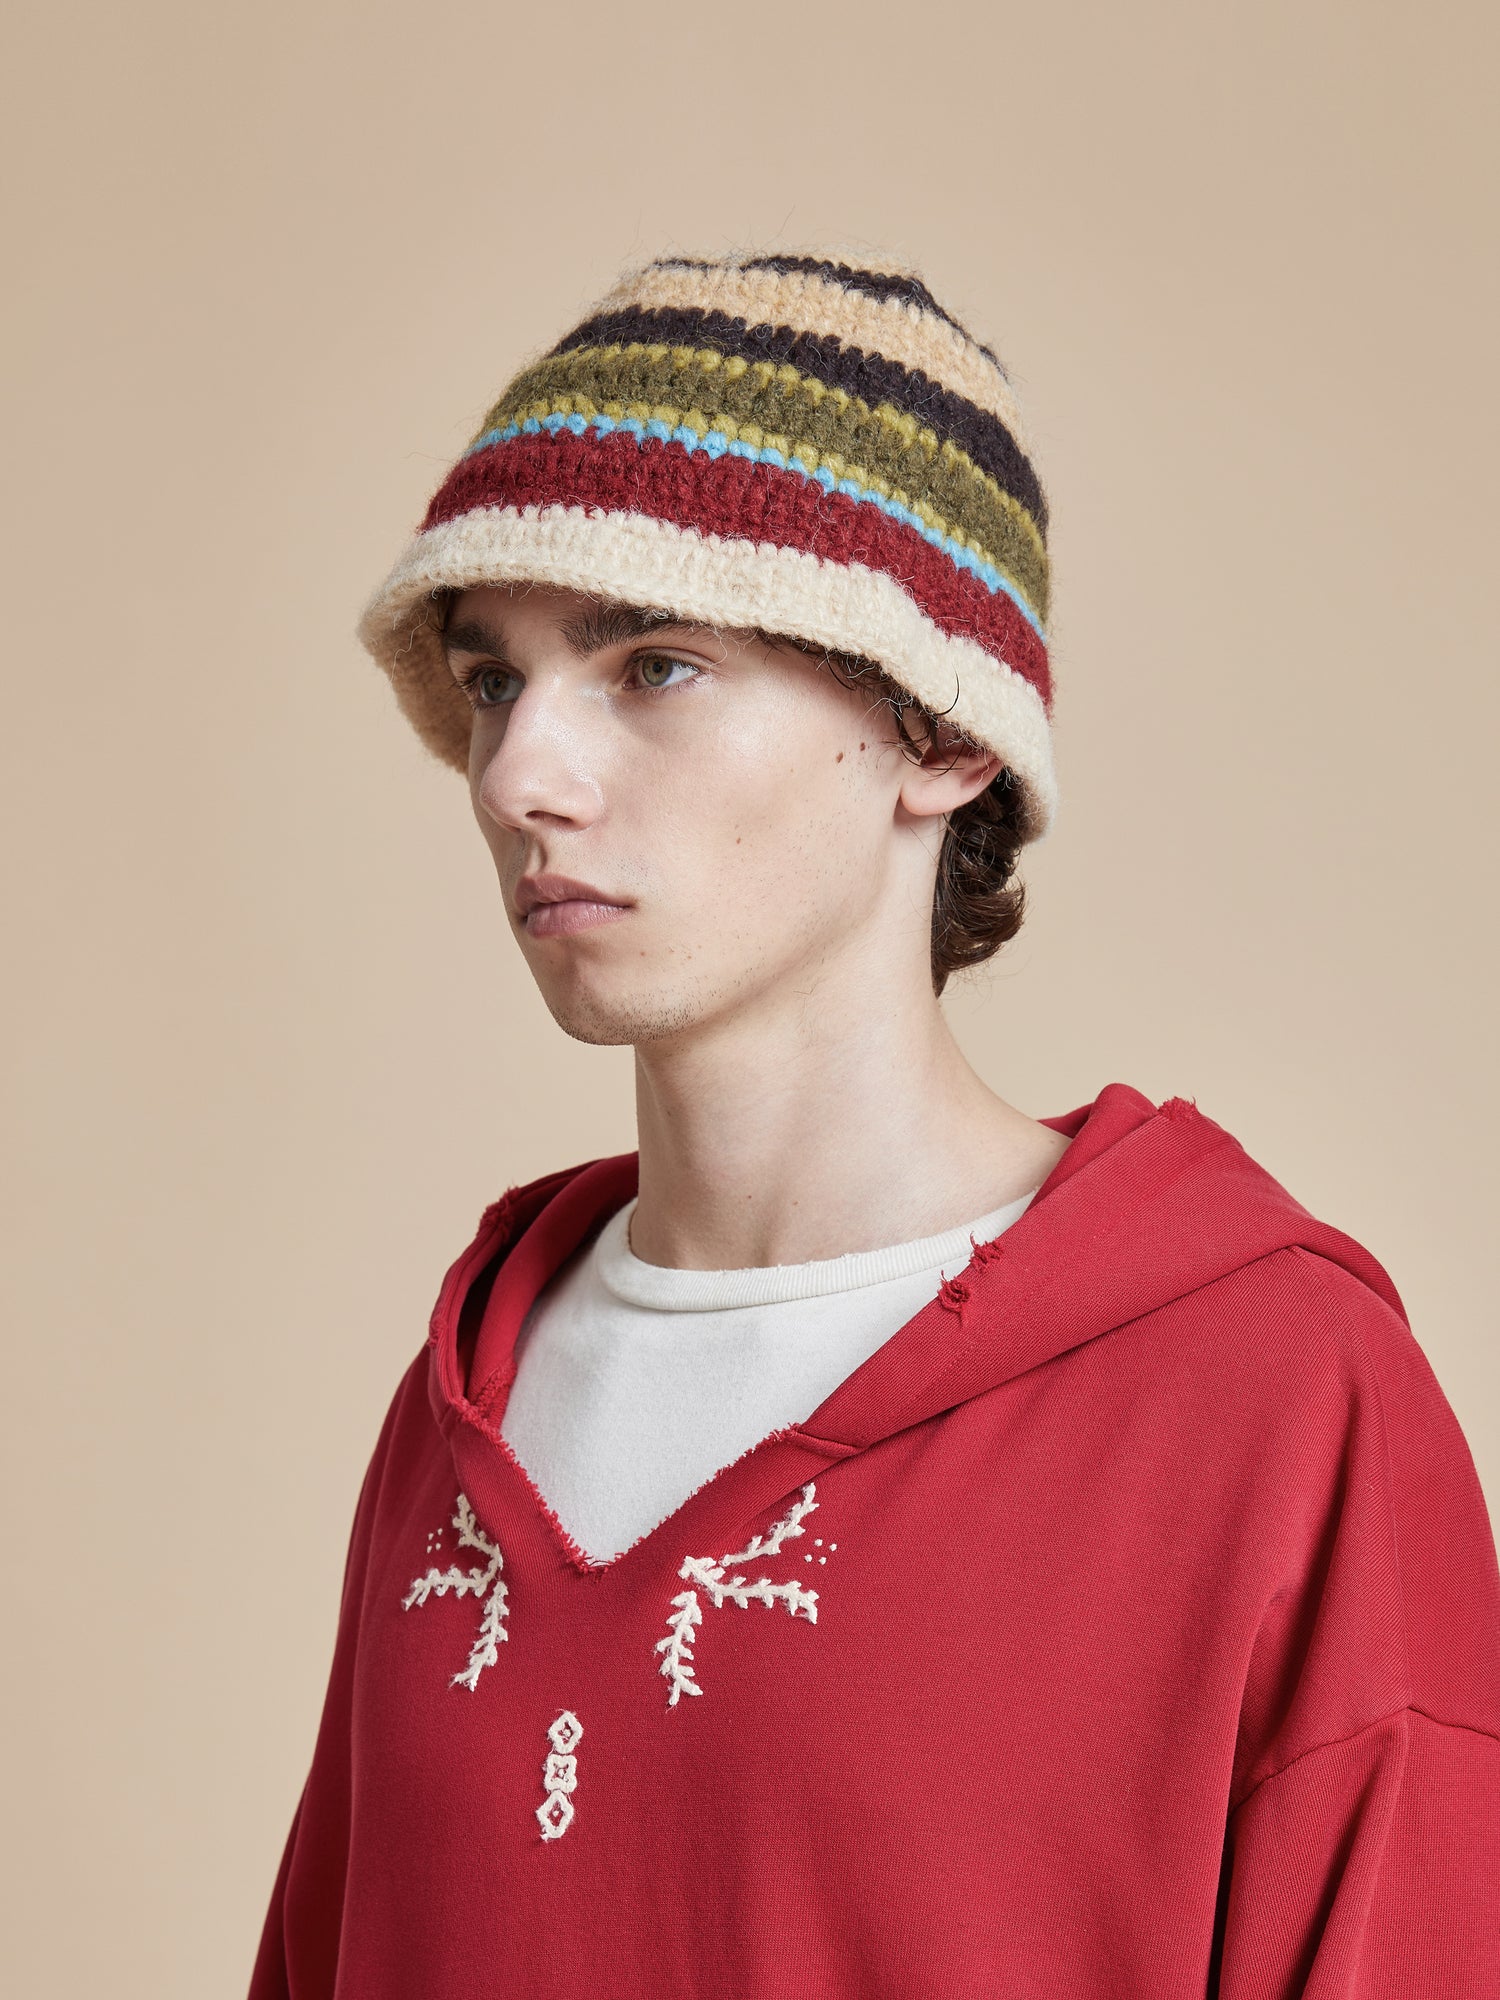 A young man wearing a red striped Found Stripe Knit Beanie hat.